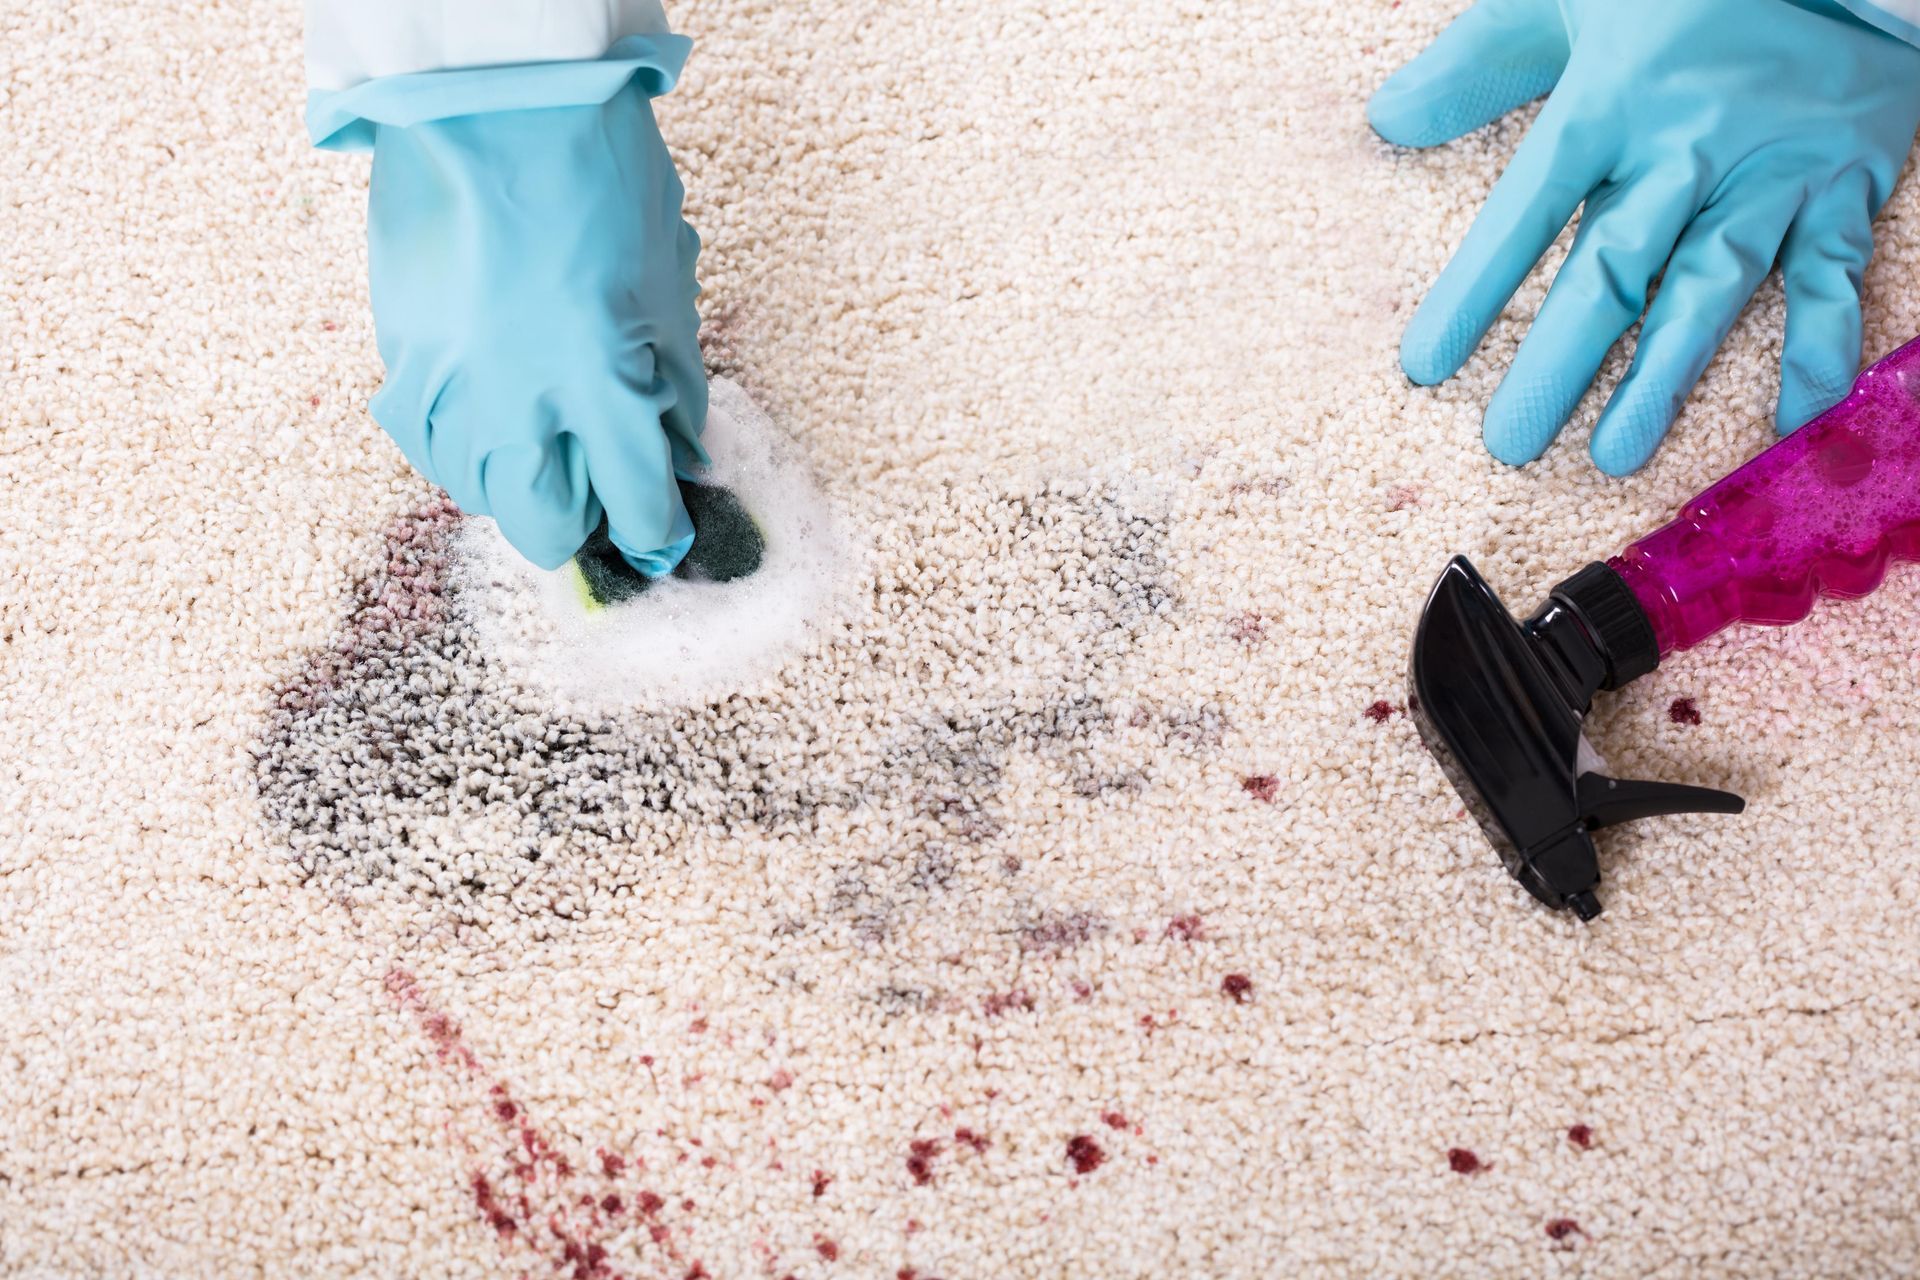 a person is cleaning a carpet with a sponge and spray bottles